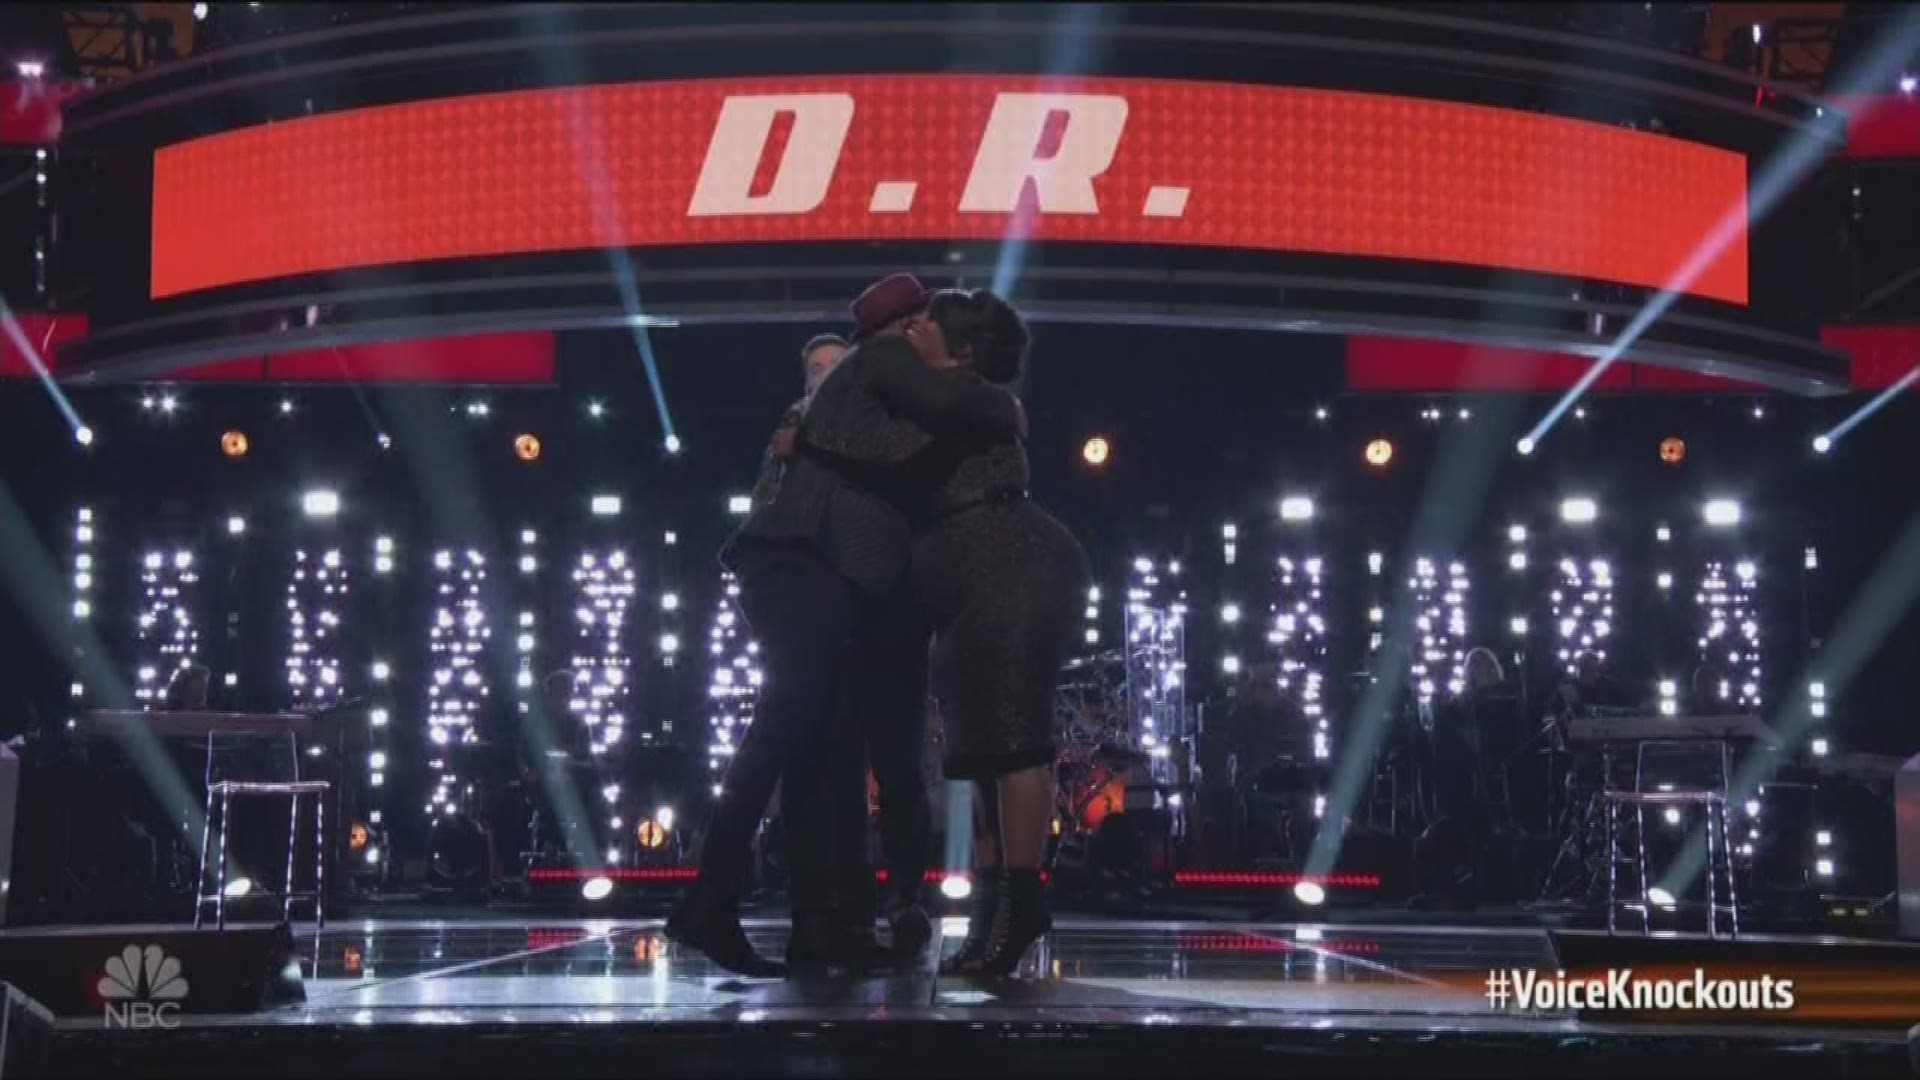 NBC 'The Voice' contestant and Cleveland native D.R. King advances to the live playoffs